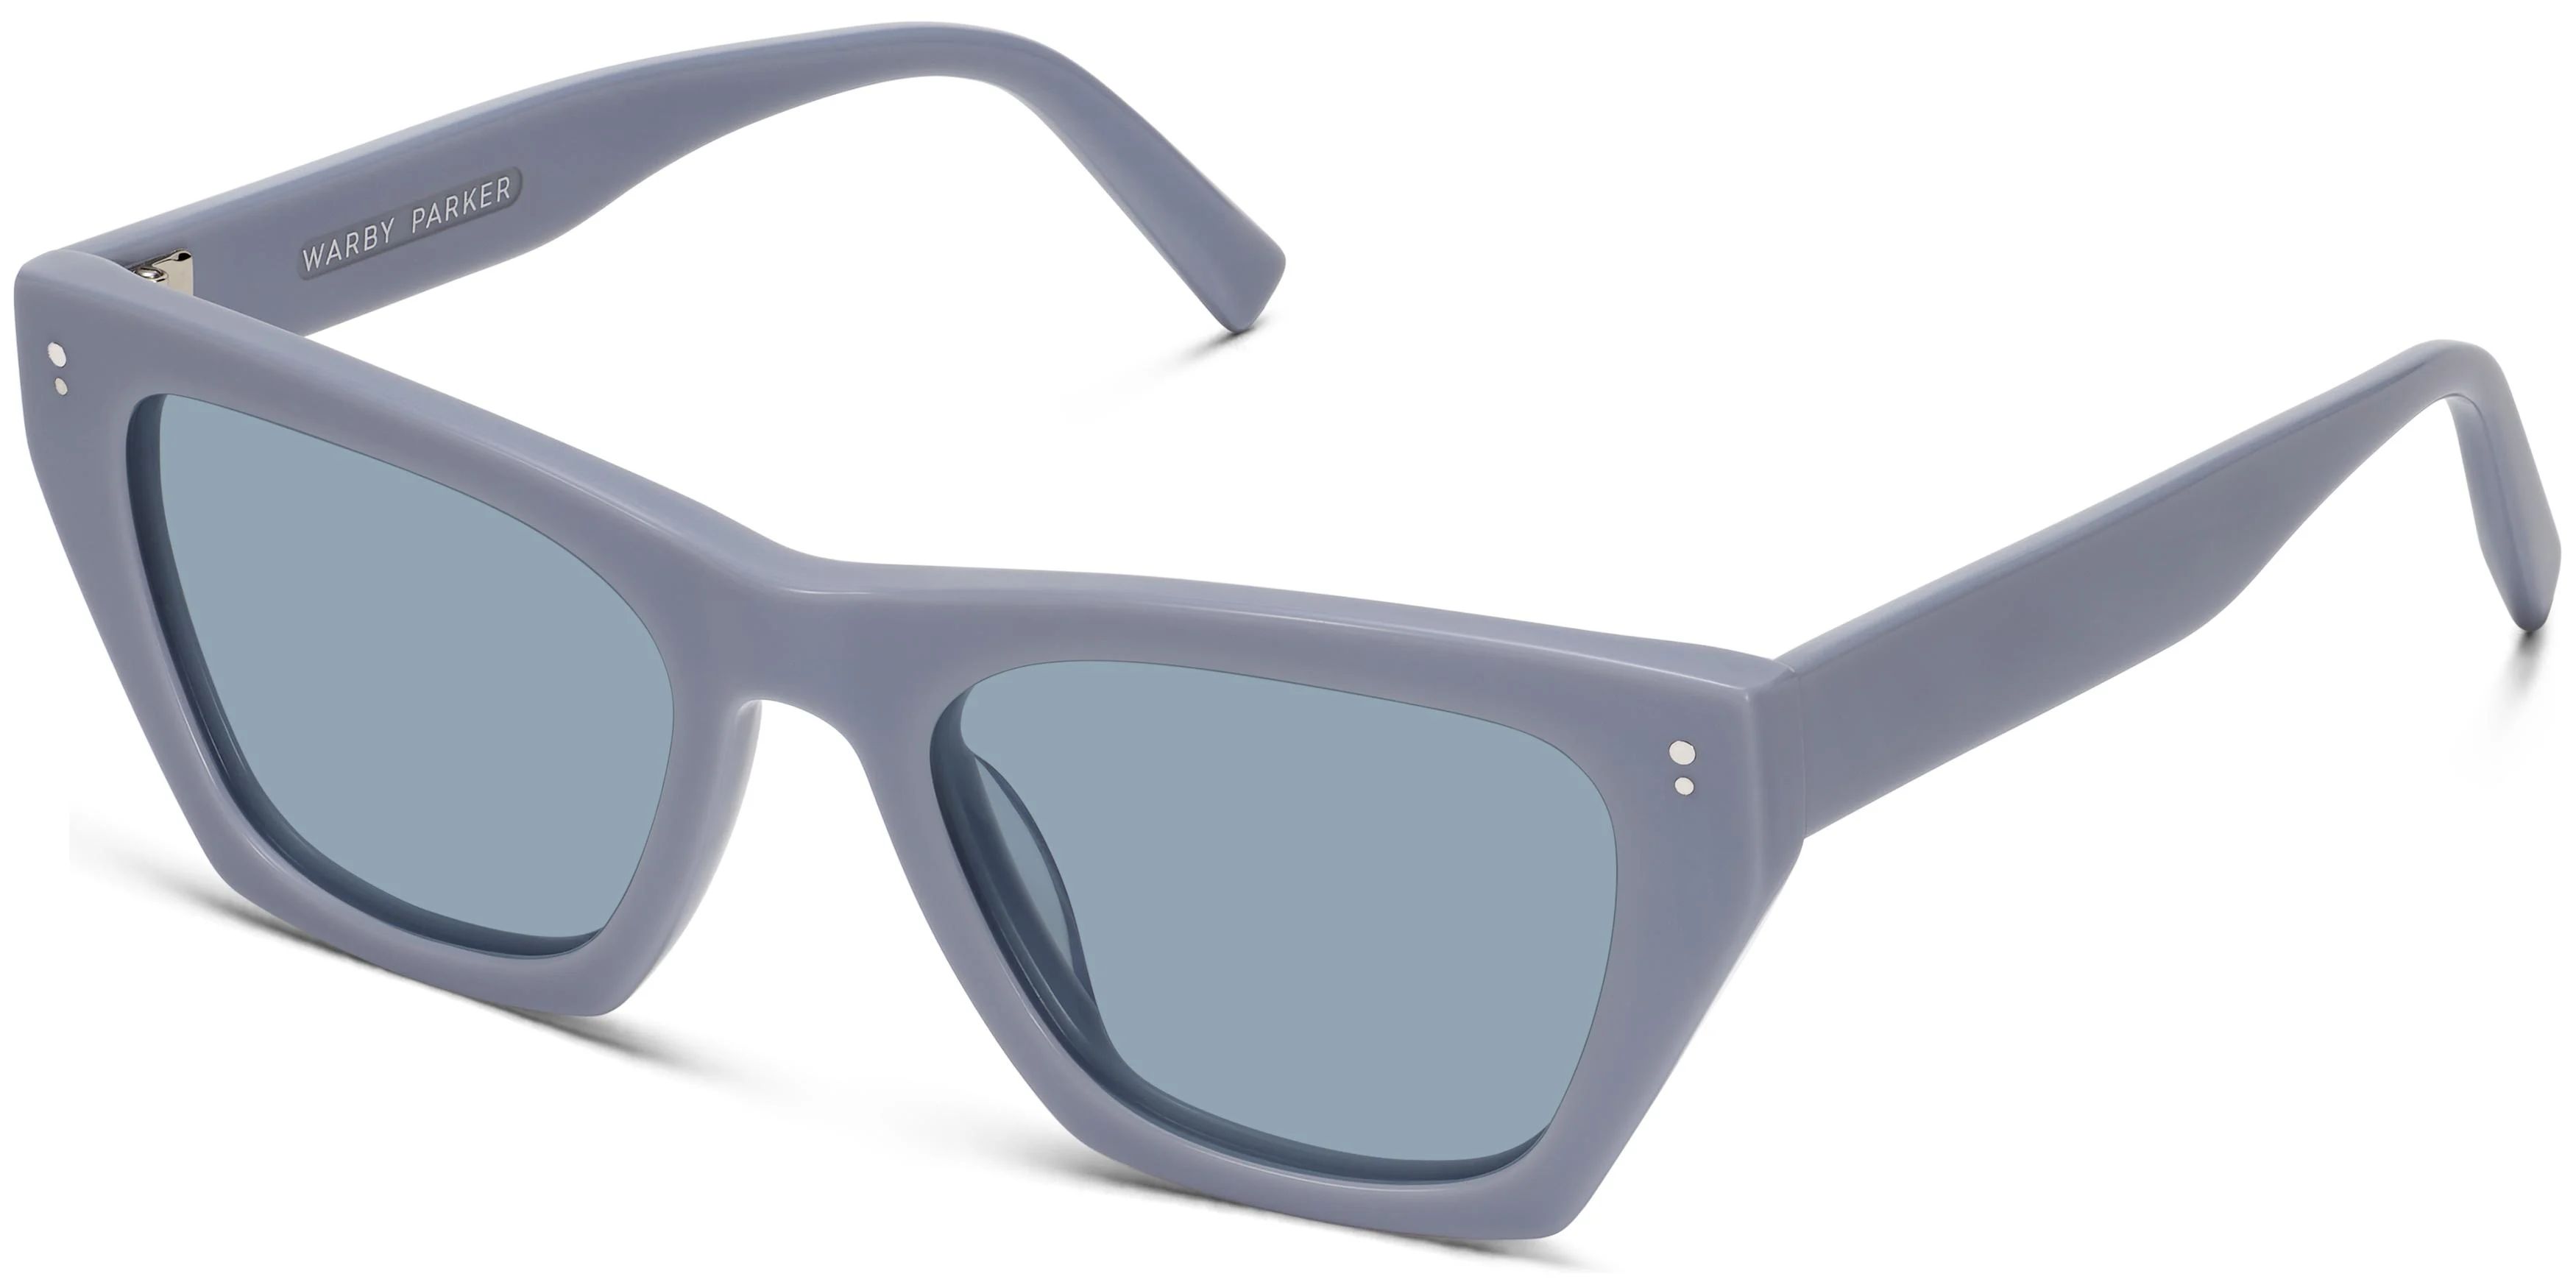 Liana Sunglasses in Stone Blue | Warby Parker | Warby Parker (US)